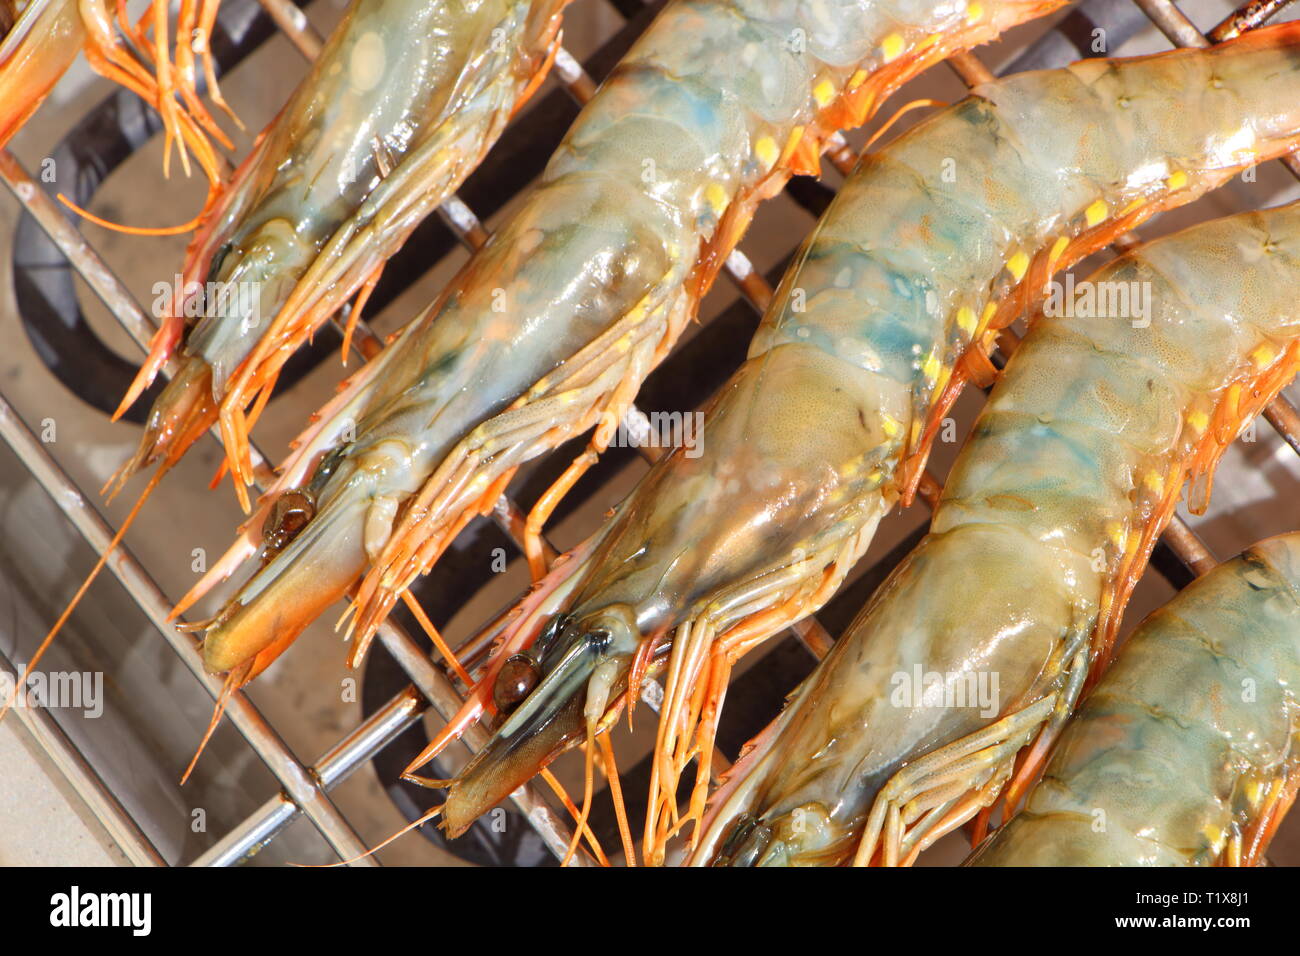 Raw fresh prawns on the rack of an electric barbecue during summer Stock Photo